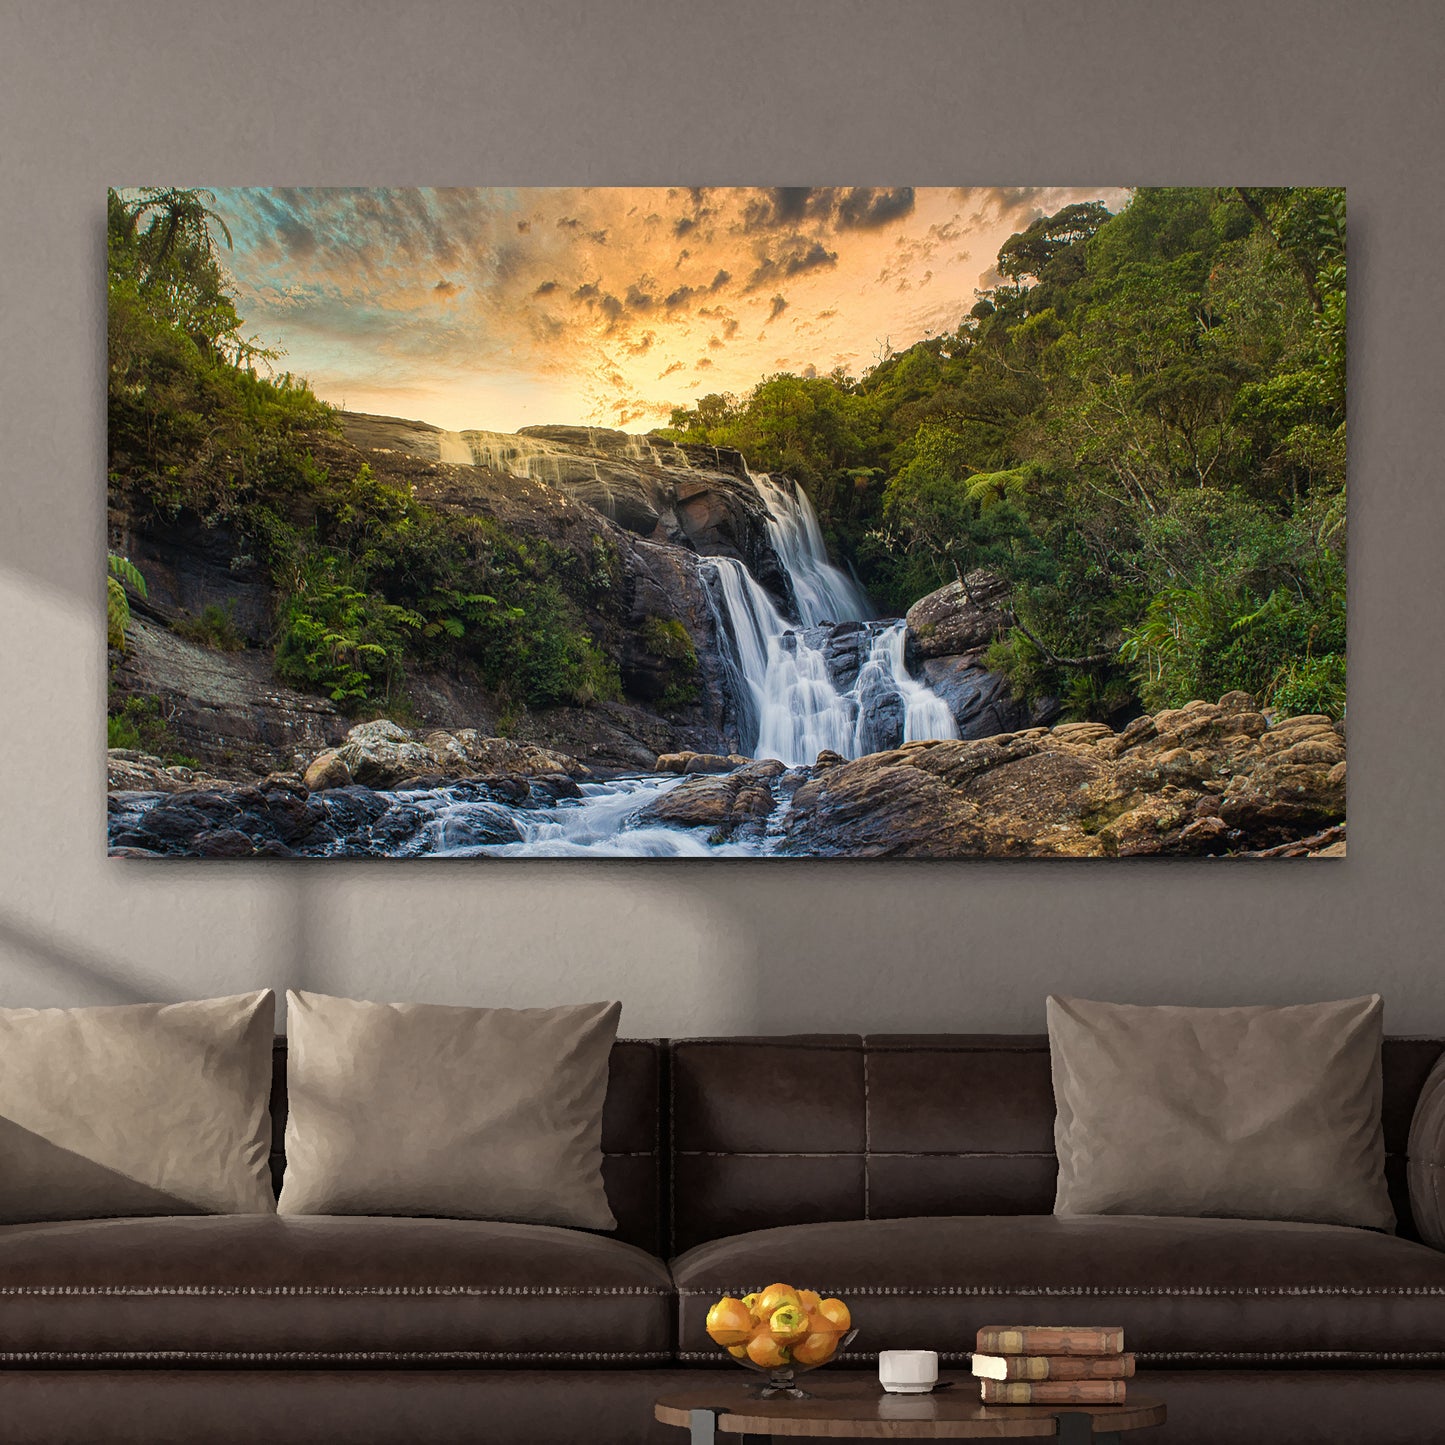 Sunset Nature Wilderness Canvas Wall Art - Image by Tailored Canvases